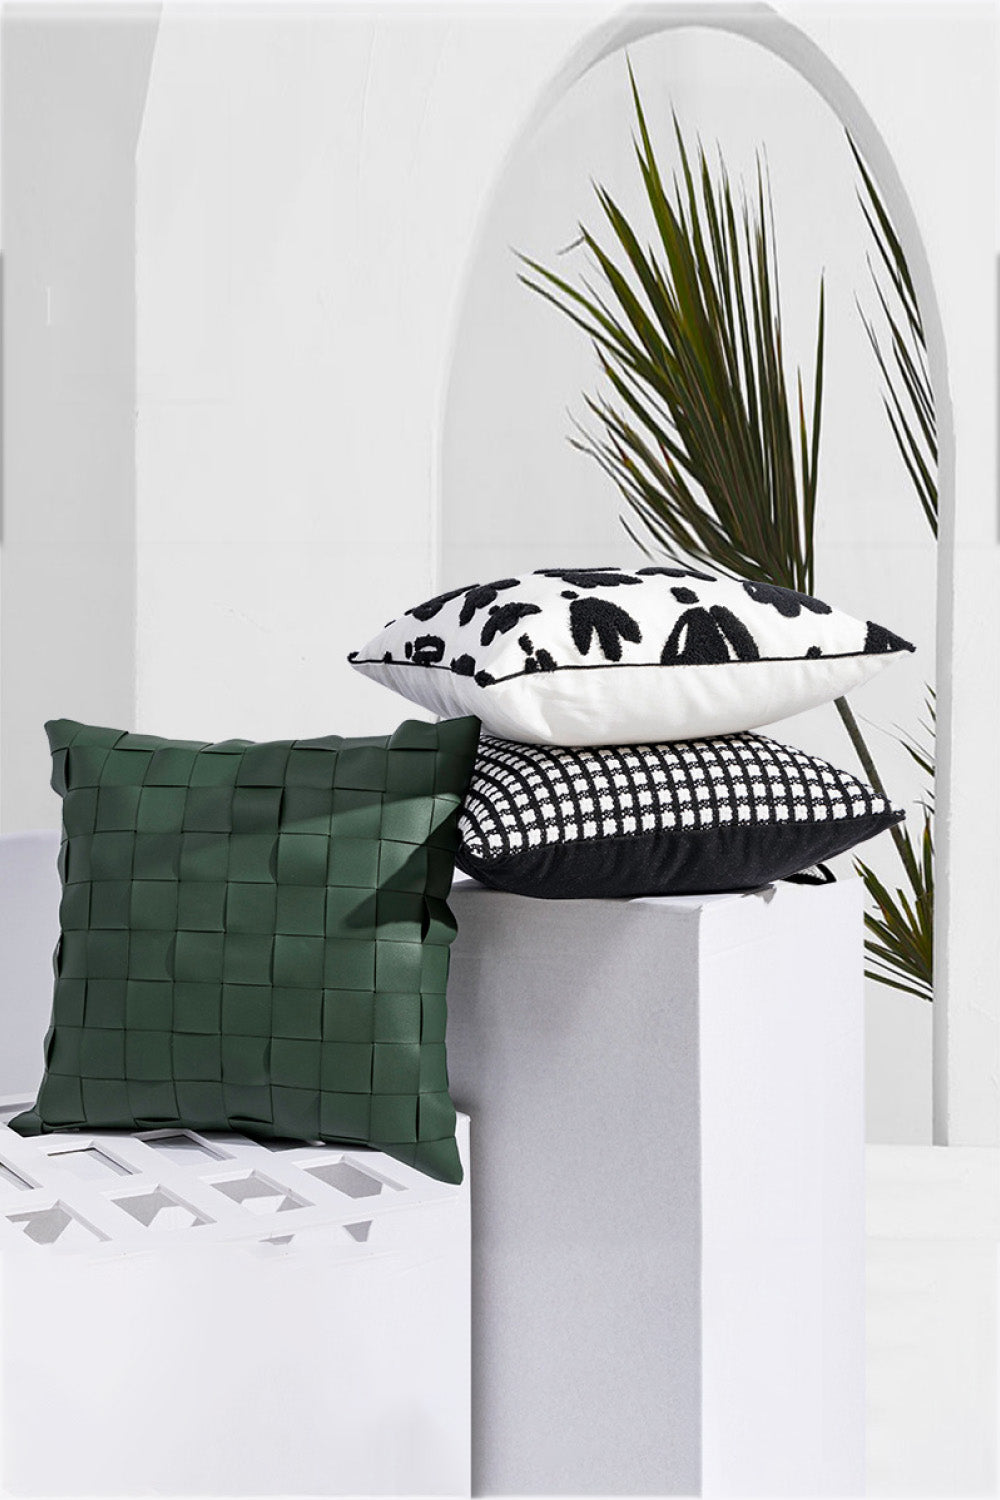 4-Pack Set Go Green Decorative Throw Pillow Cases